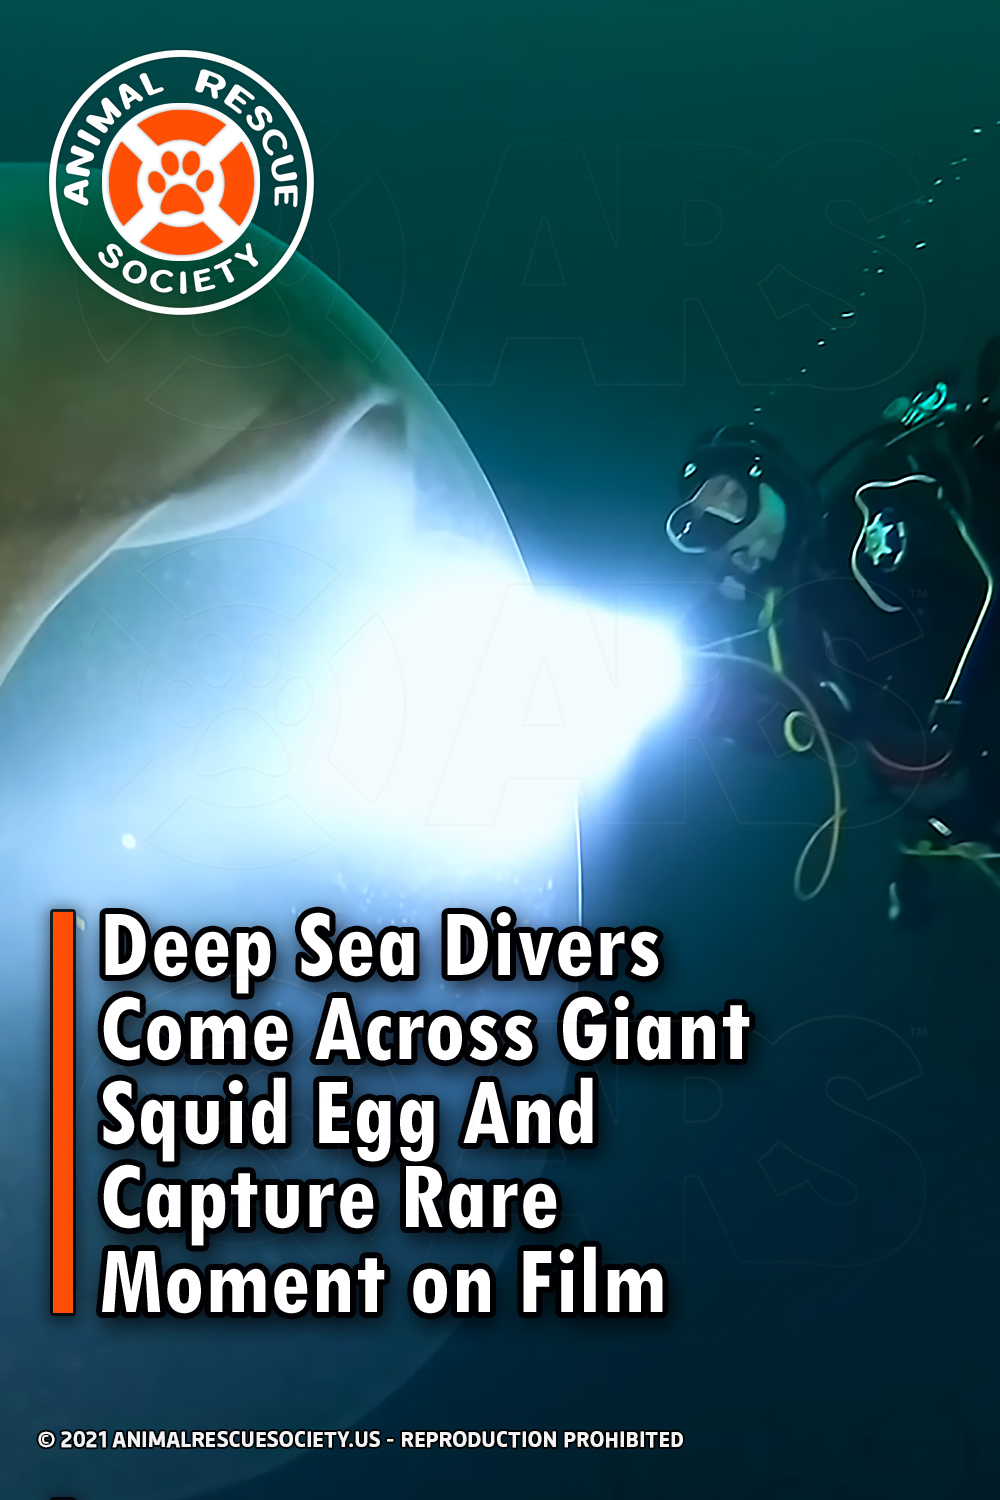 Deep Sea Divers Come Across Giant Squid Egg And Capture Rare Moment on Film